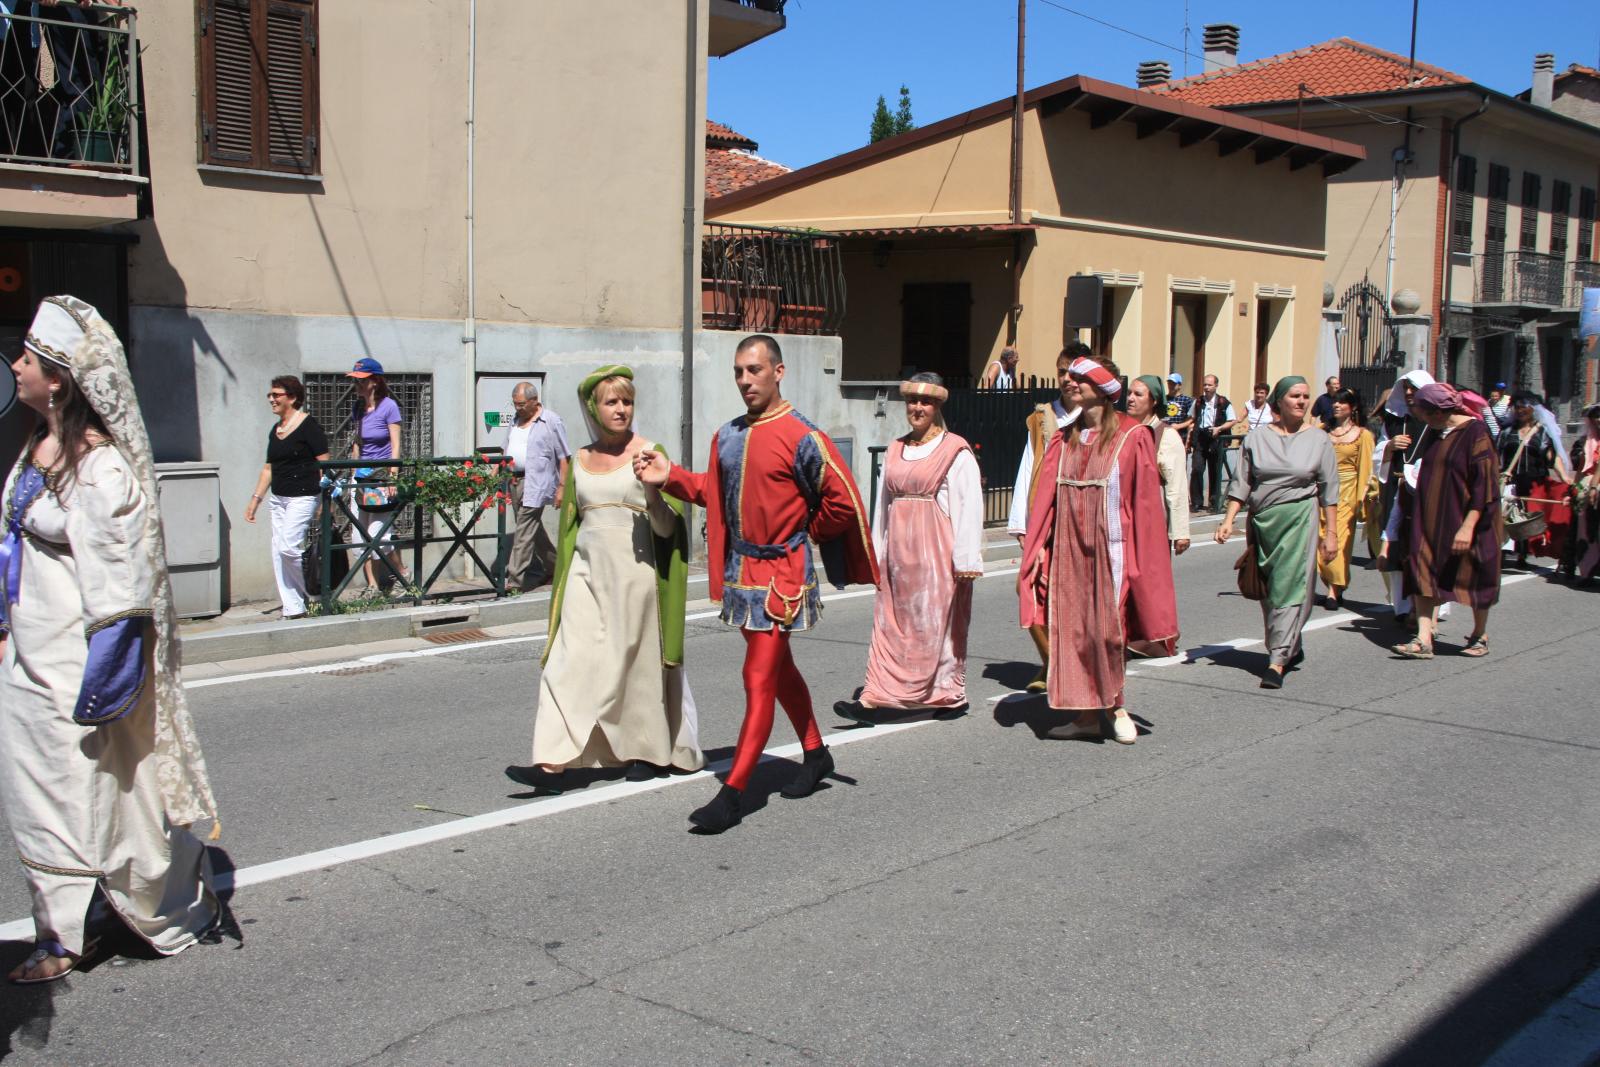 several people in costumes walking down the street